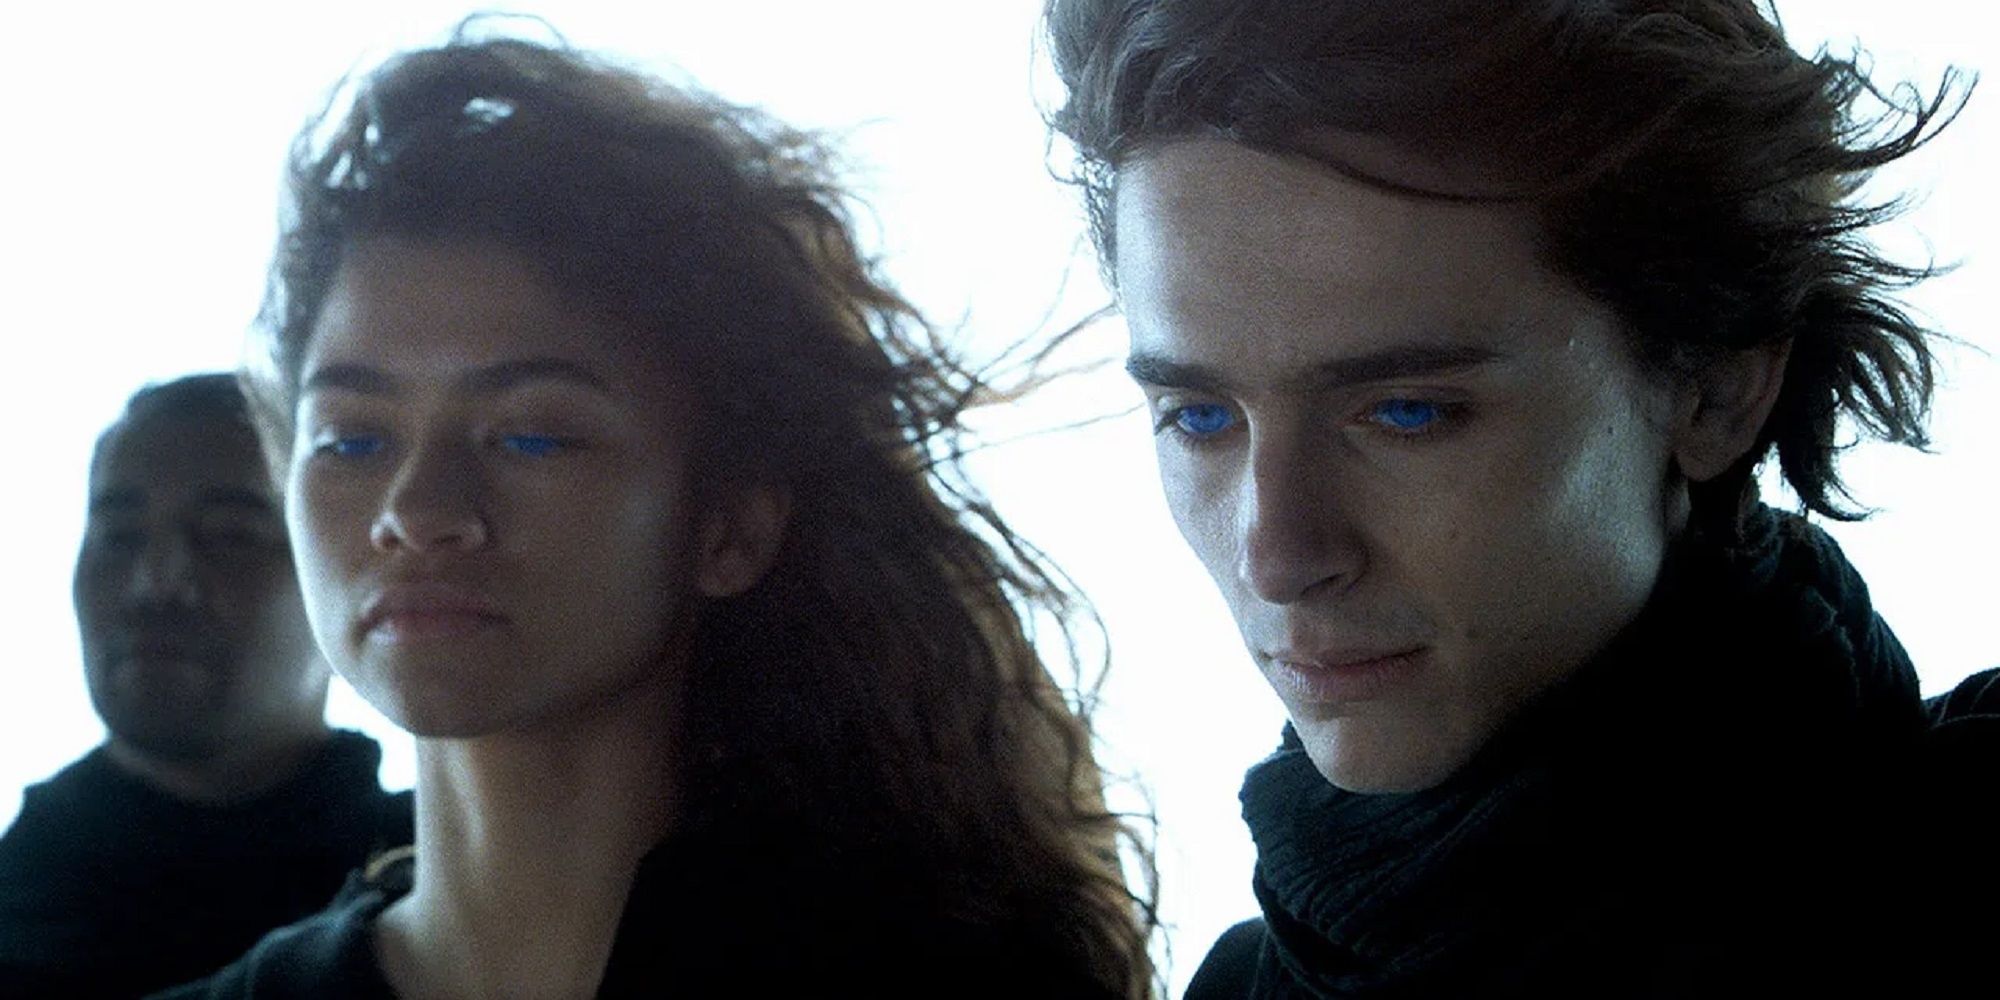 Chani and Paul Atreides with Spice blue eyes in Dune.